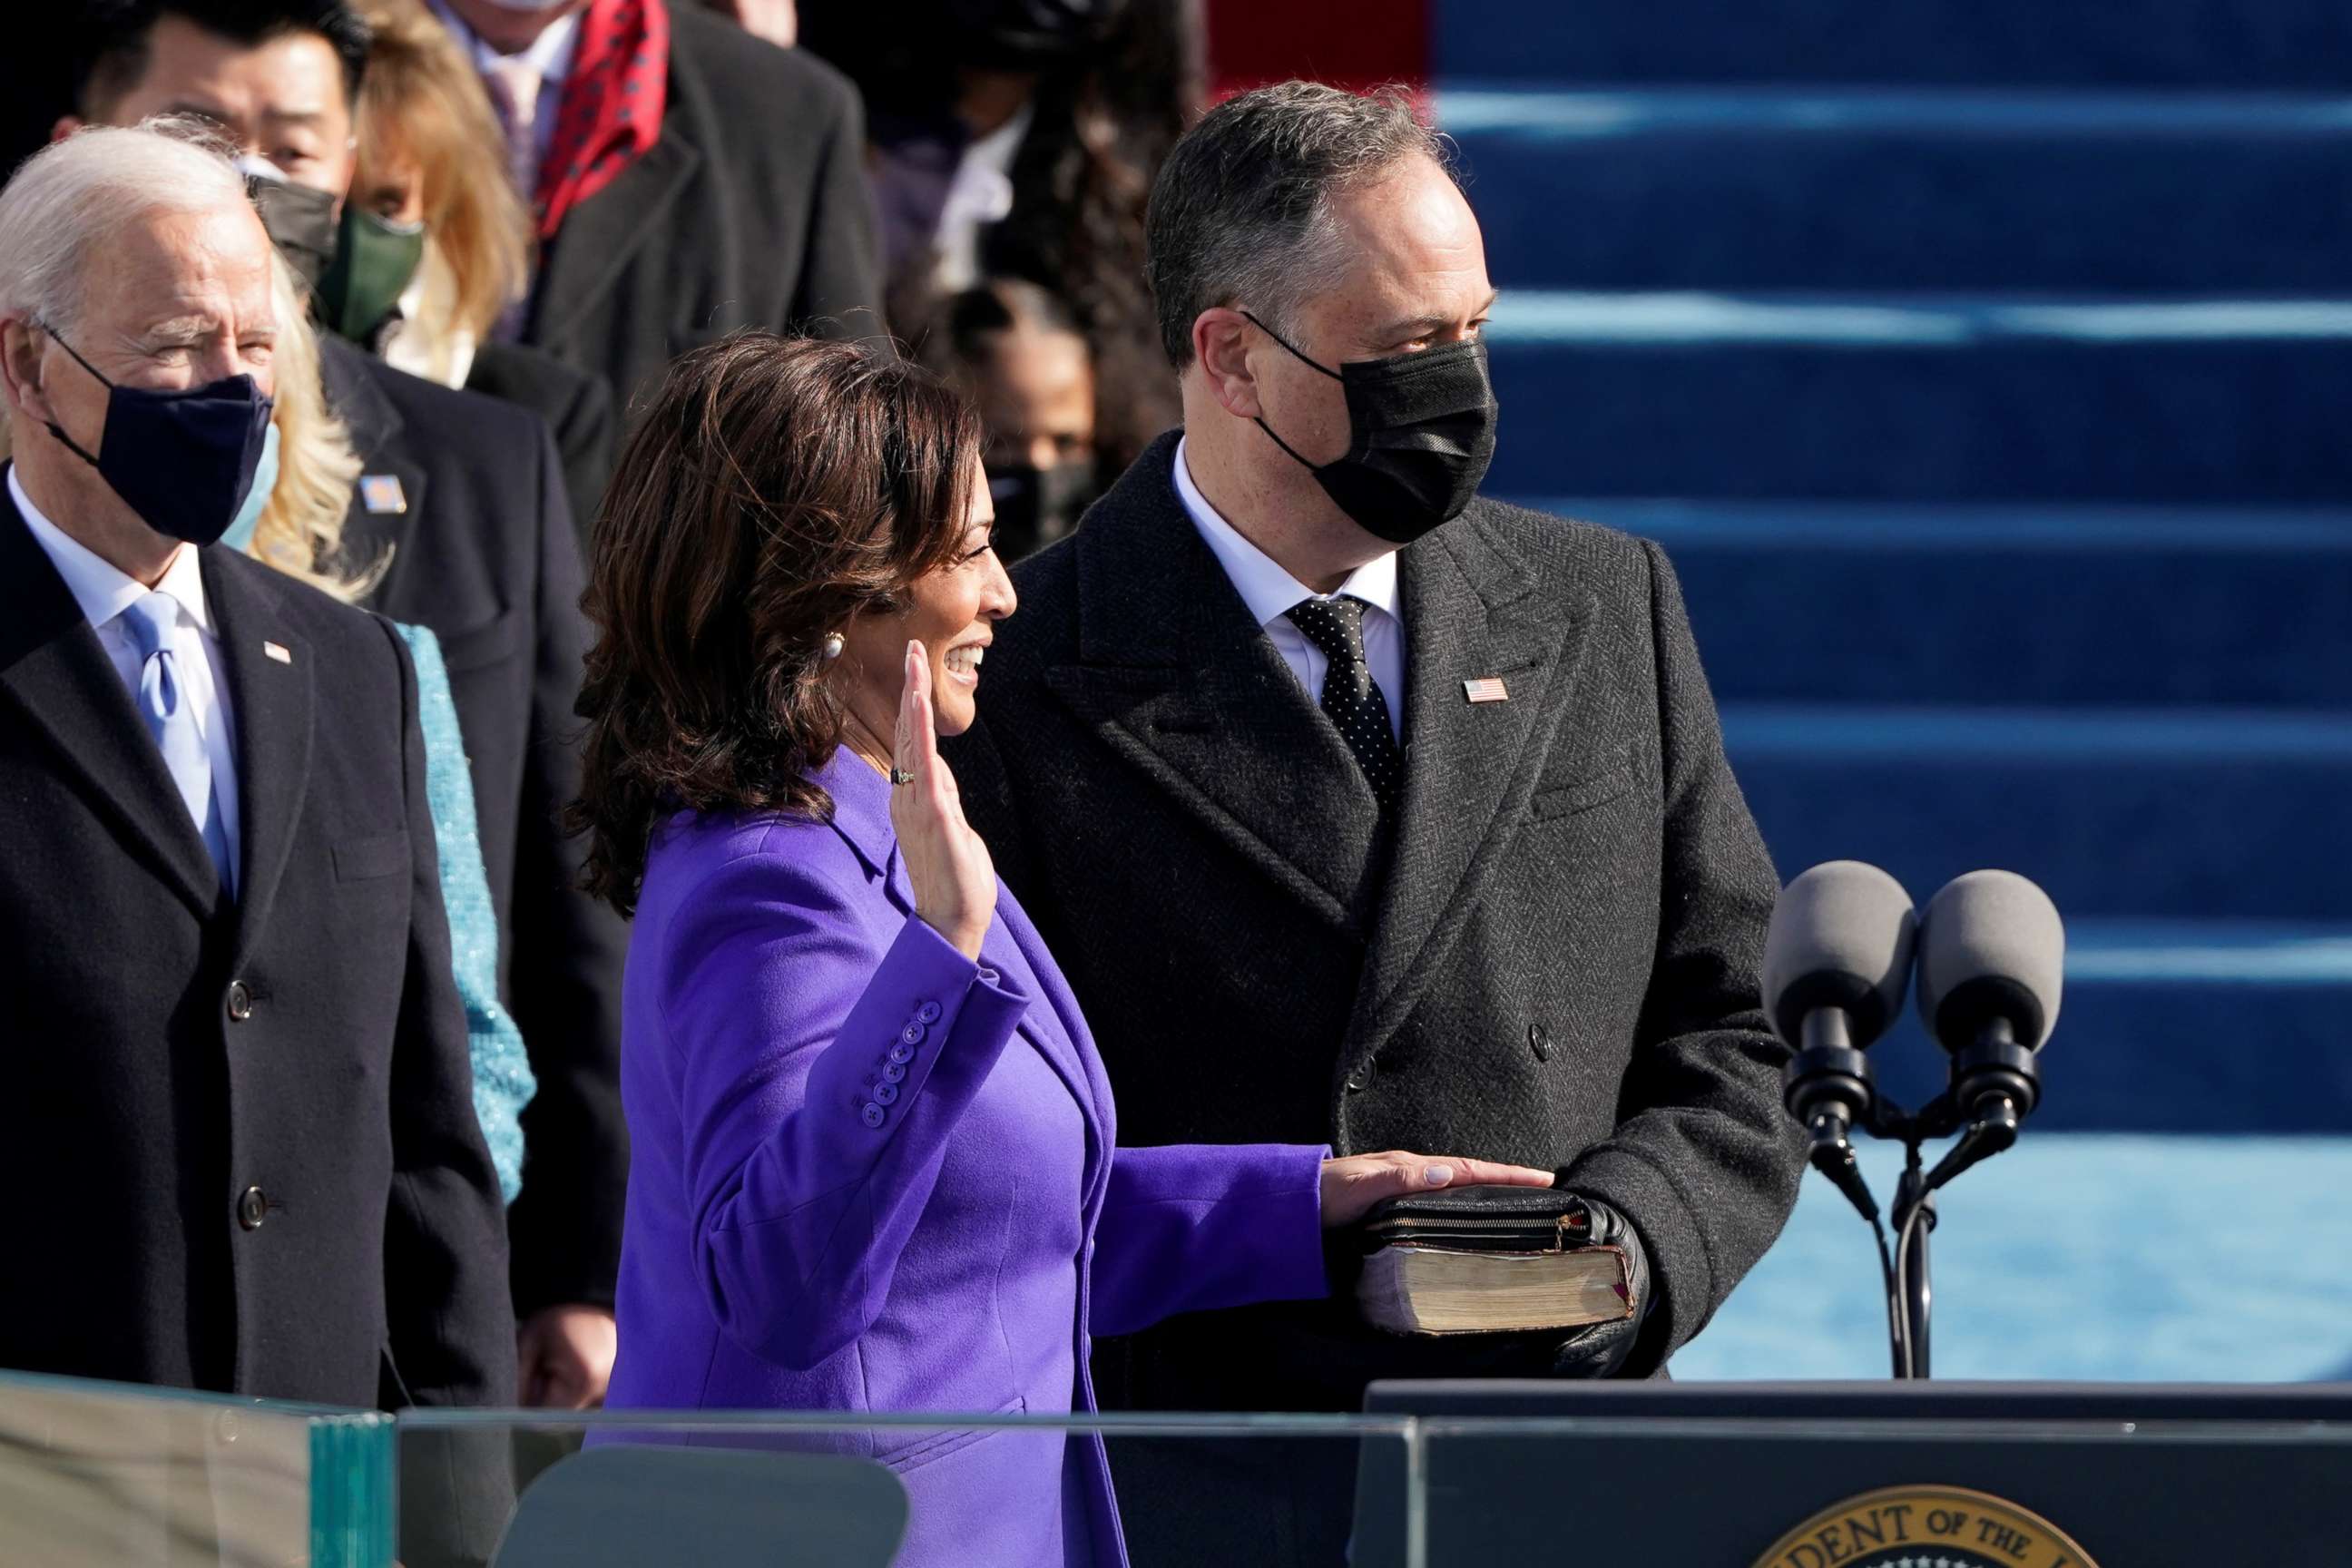 PHOTO: Kamala Harris is sworn in as Vice President as her spouse Doug Emhoff holds a bible during the inauguration of Joe Biden as the 46th President of the United States on the West Front of the U.S. Capitol in Washington, Jan. 20, 2021.